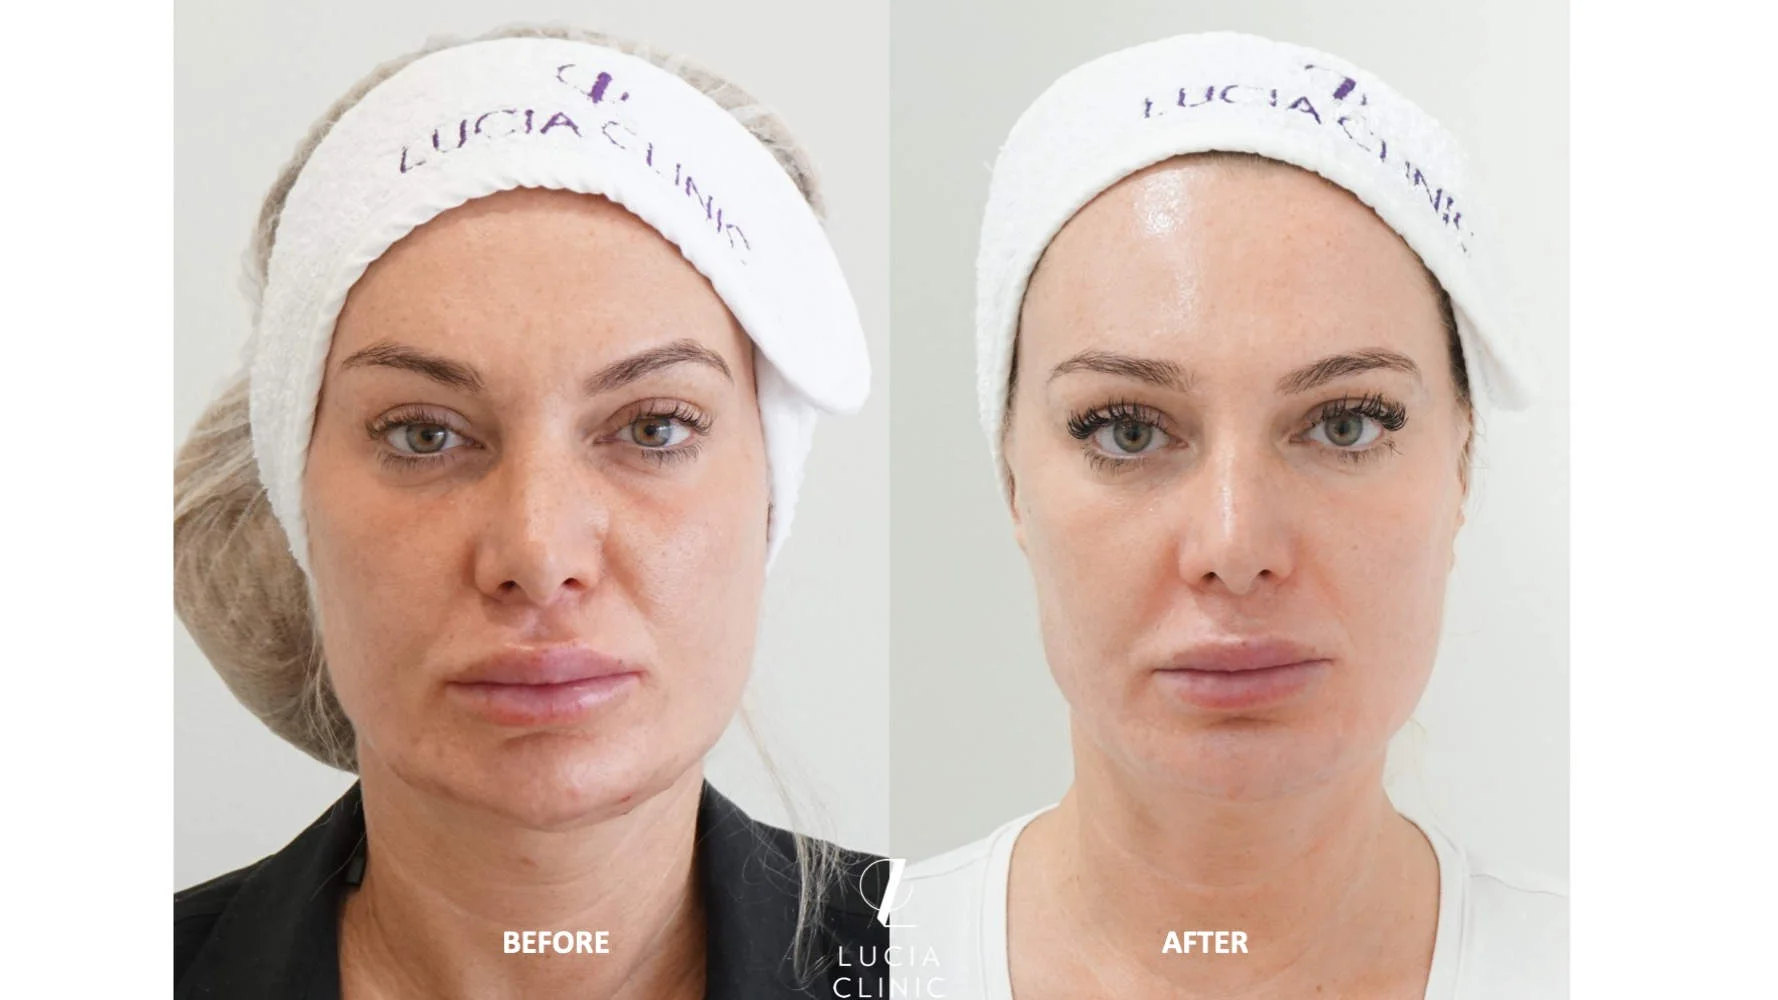 Clear + Brilliant is an effective laser treatment for regular maintenance of skin appearance.